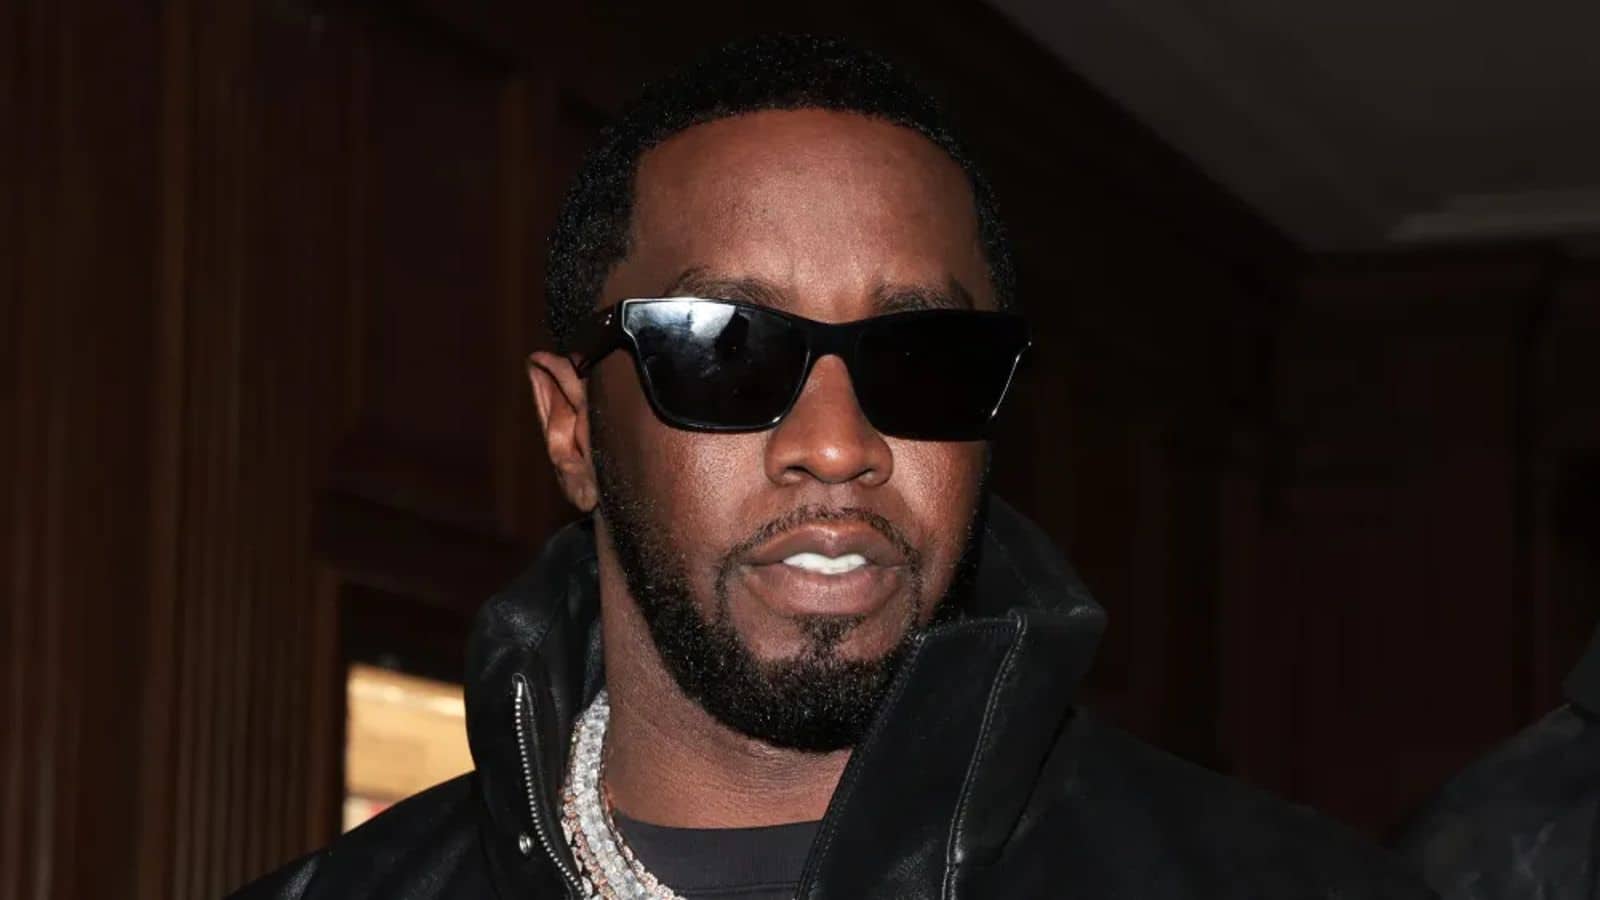 Sean 'Diddy' Combs's lawyer calls raids a 'witch hunt'